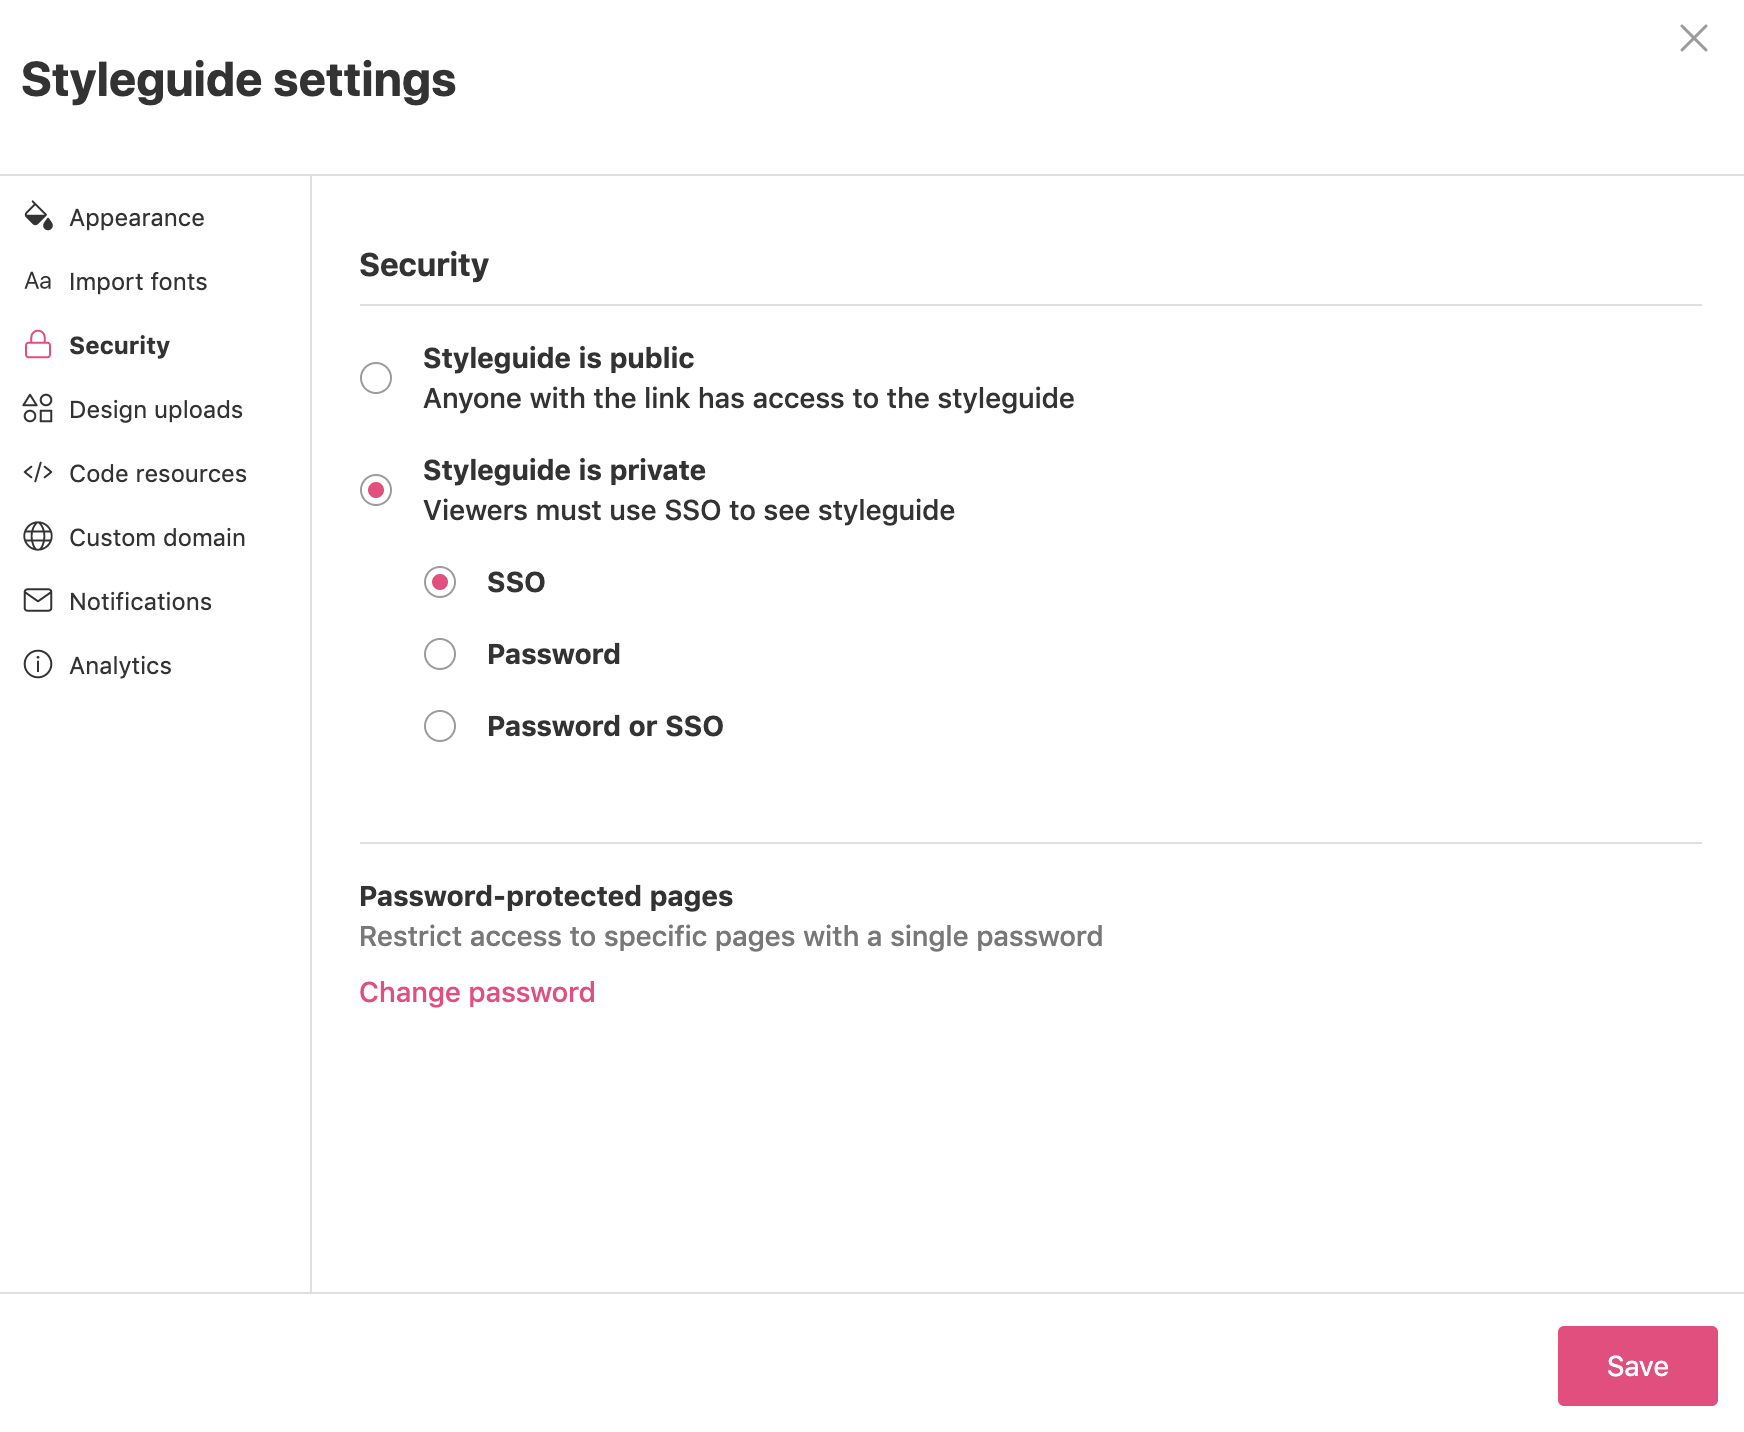 Security section in the Styleguide settings